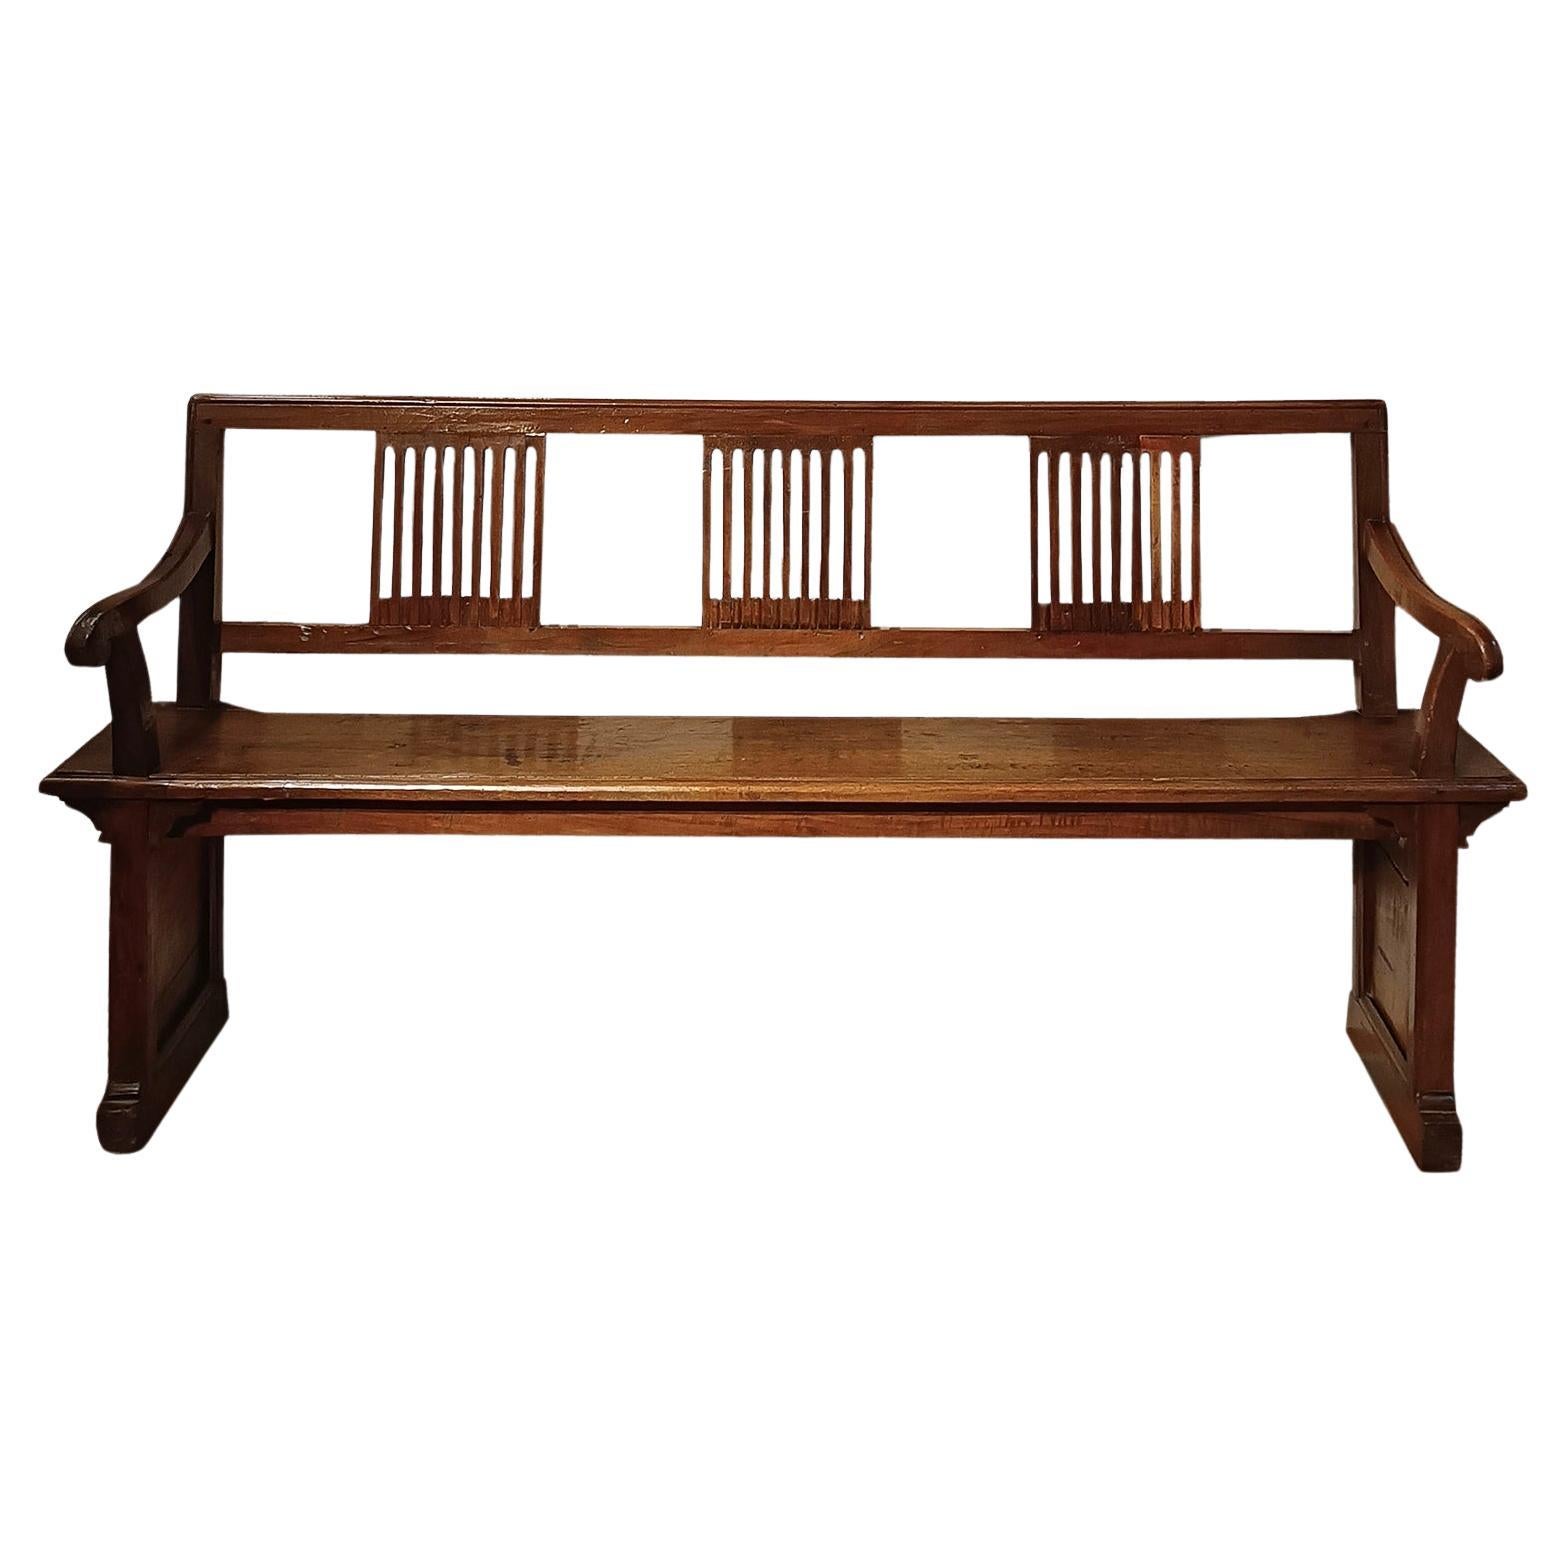 END OF THE 17th CENTURY WALNUT ENTRANCE BENCH 